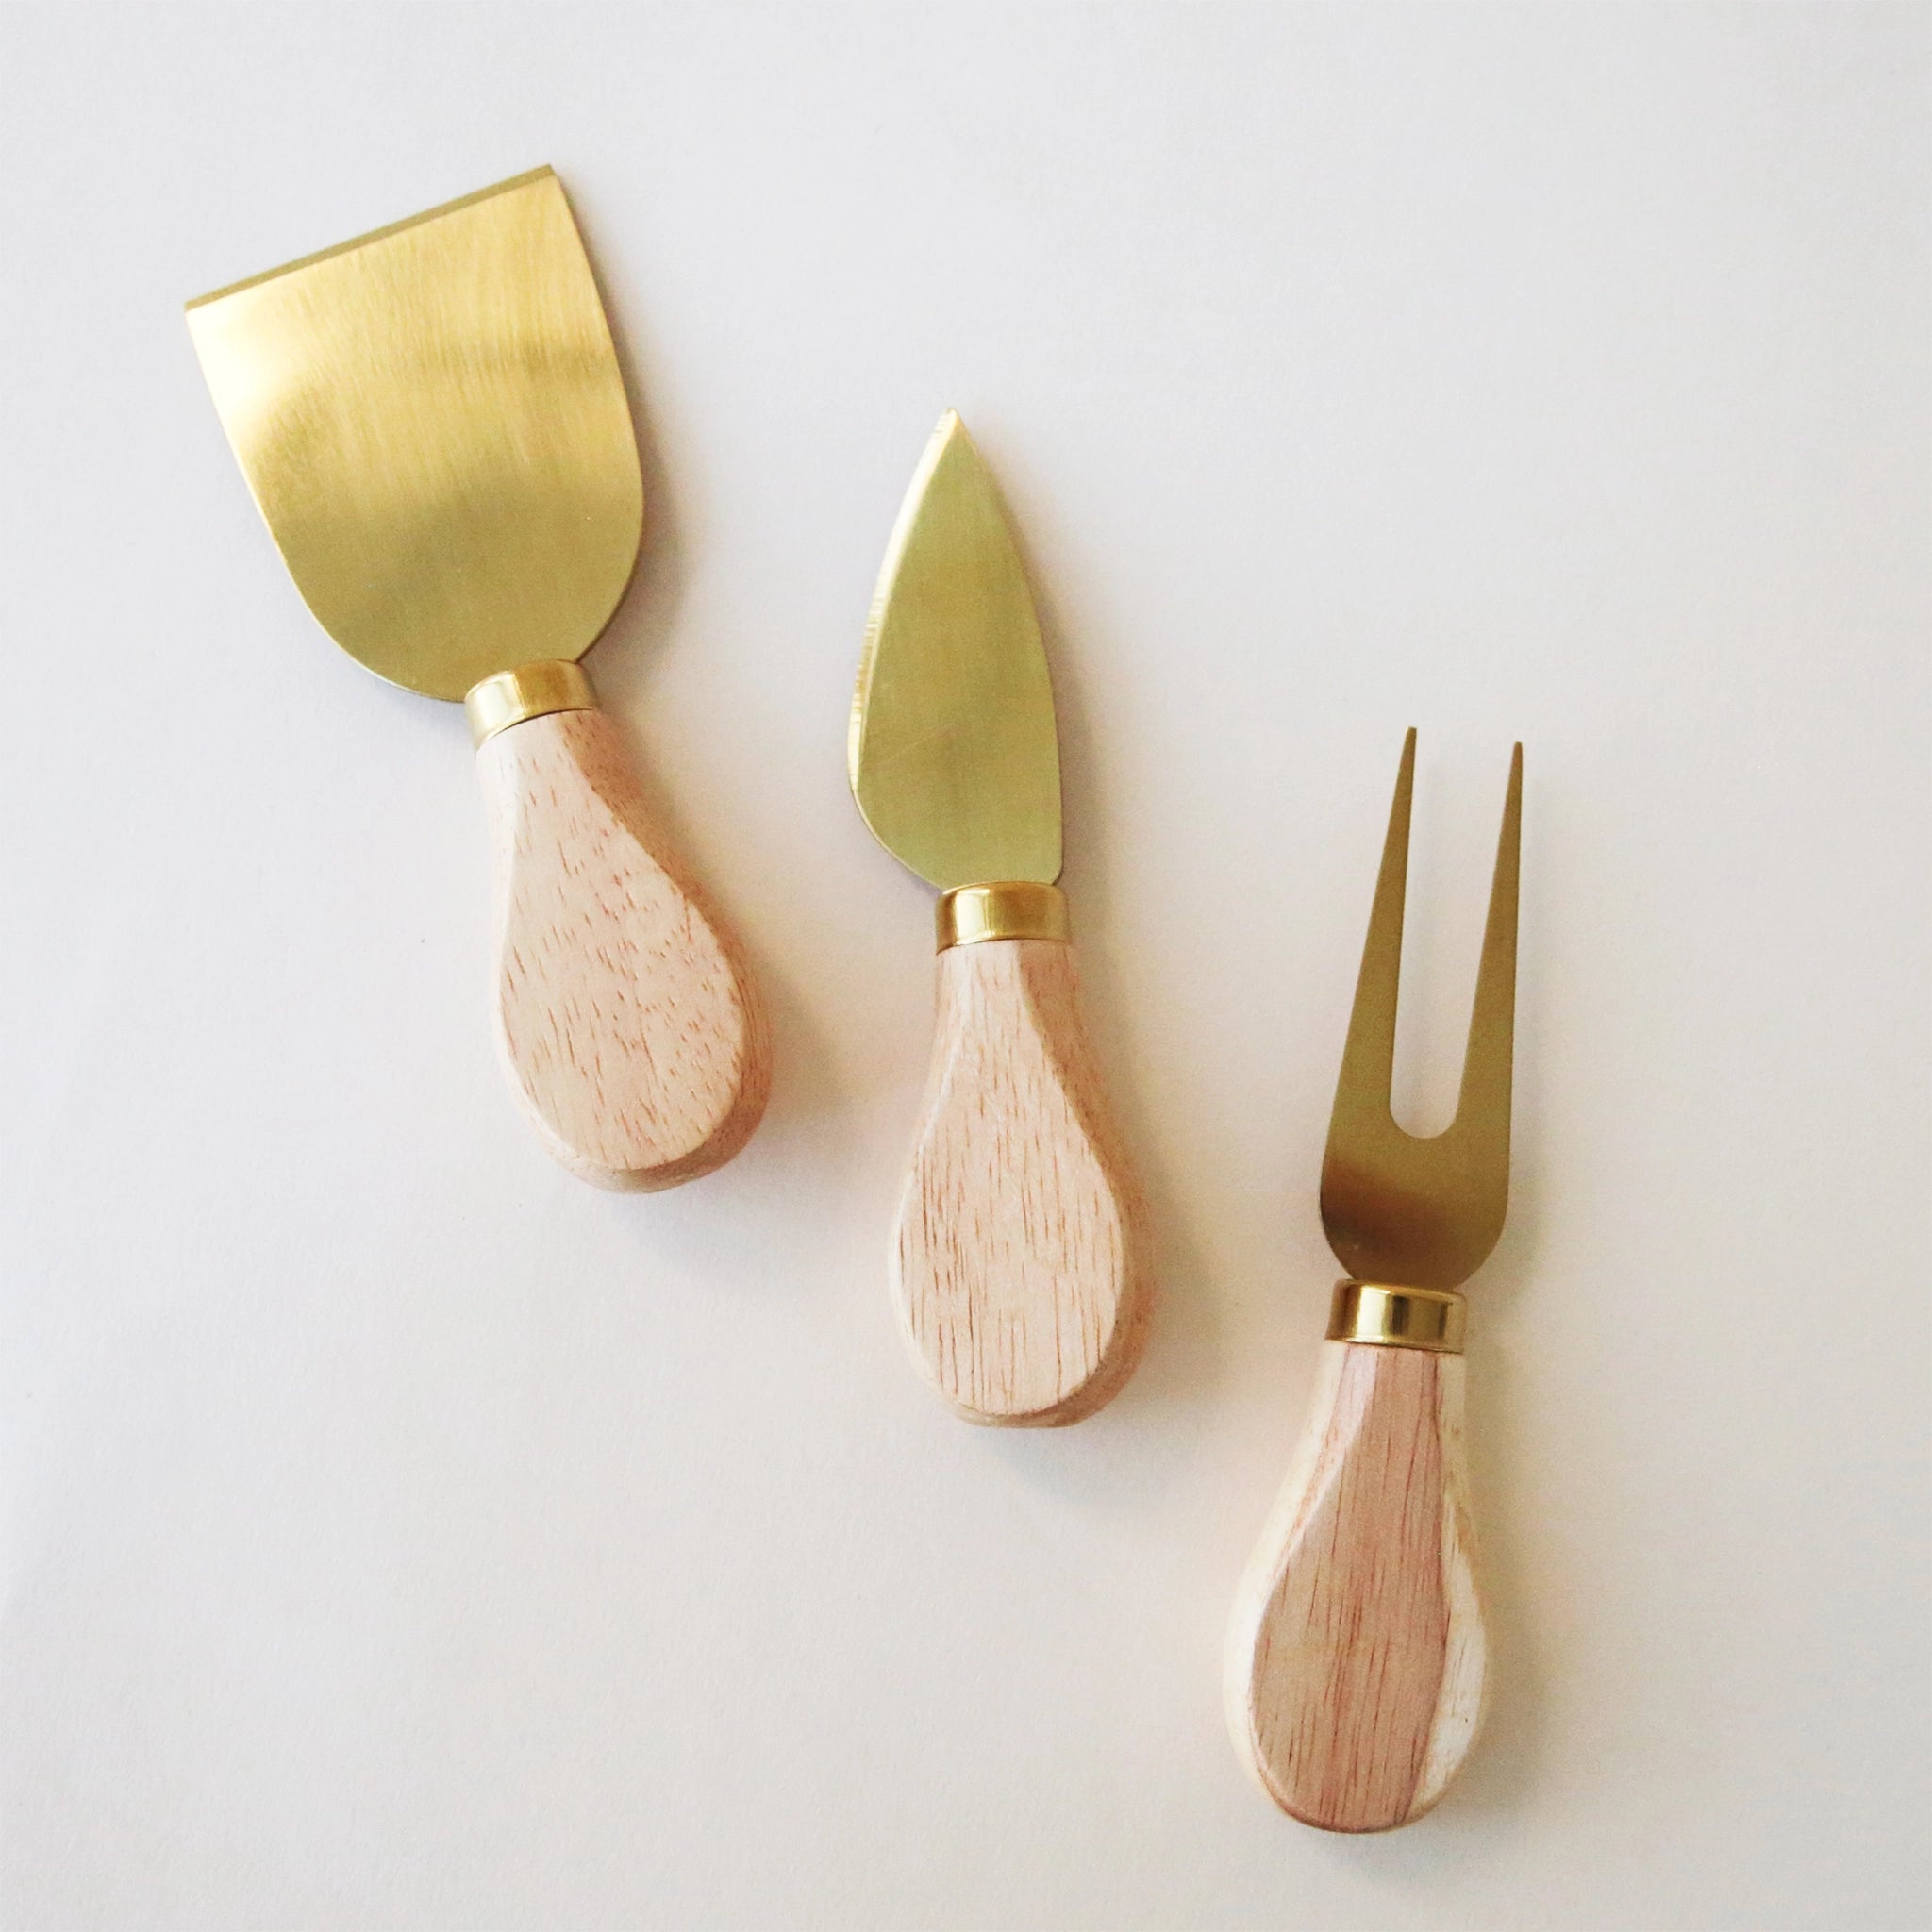 A set of three cheese utensils with oak handles and gold utensils.